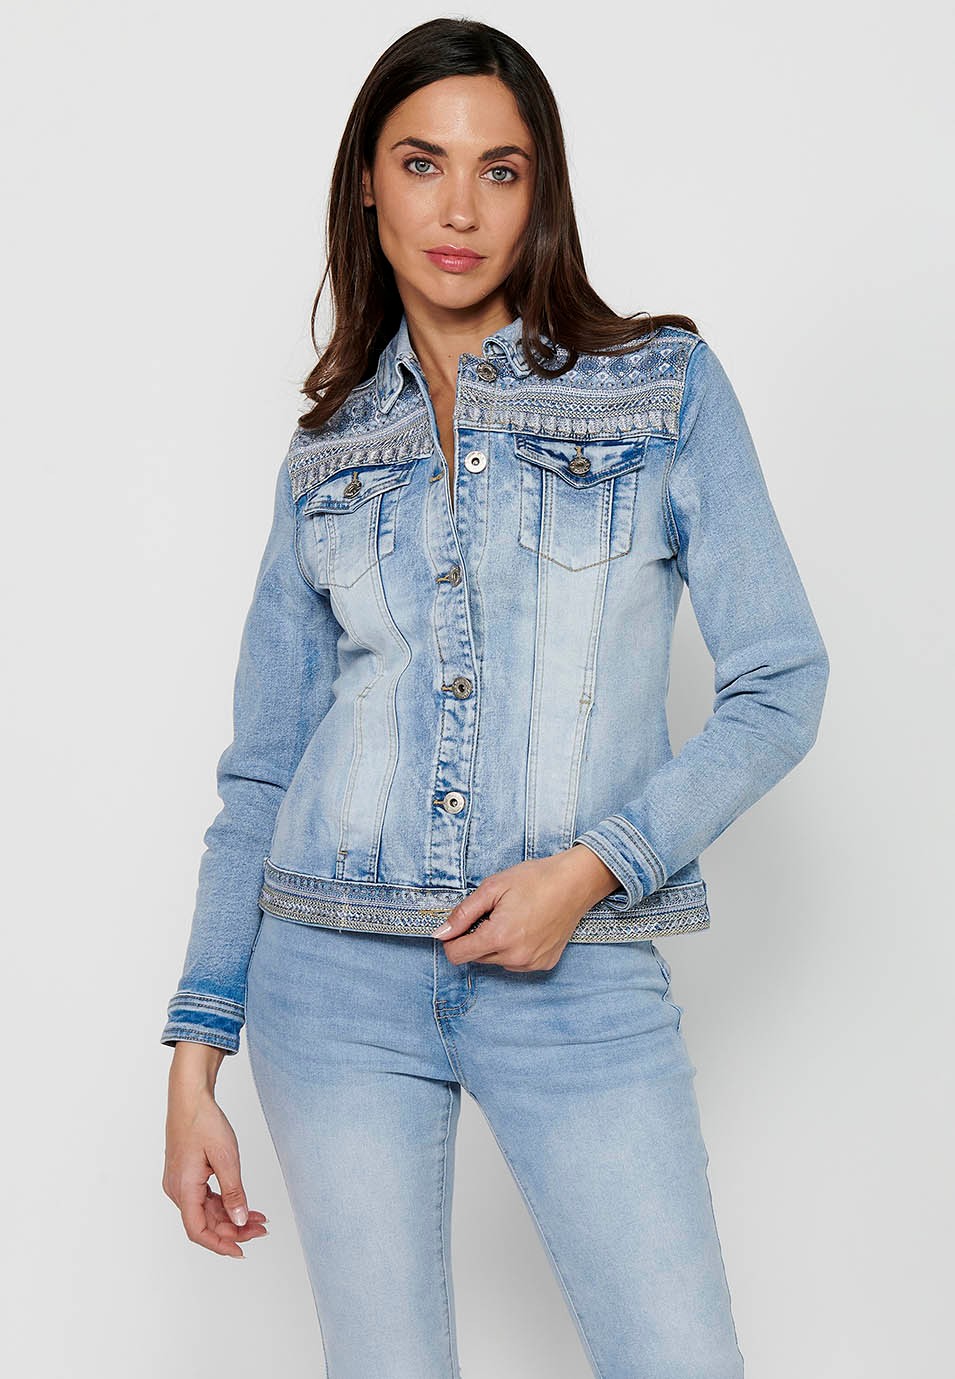 Denim jacket with front closure with buttons and shirt collar with pockets and embroidered details in light blue for women 9